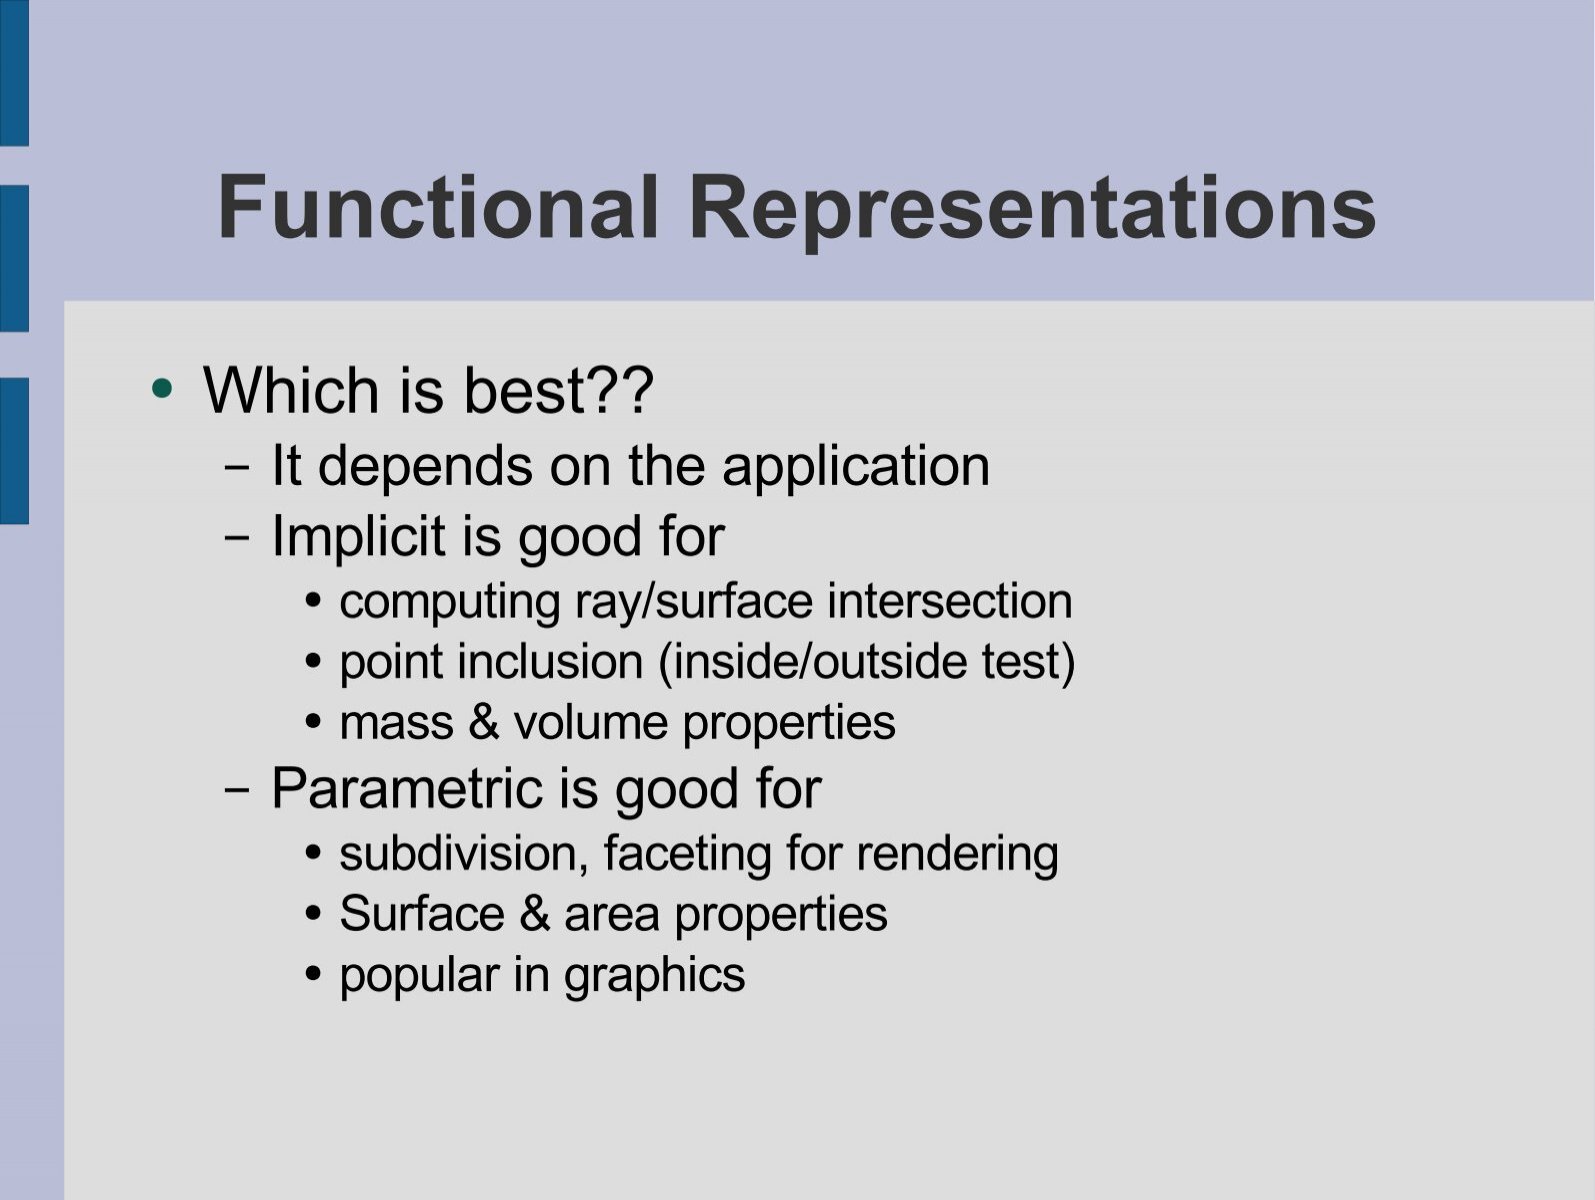 functional representation meaning in english